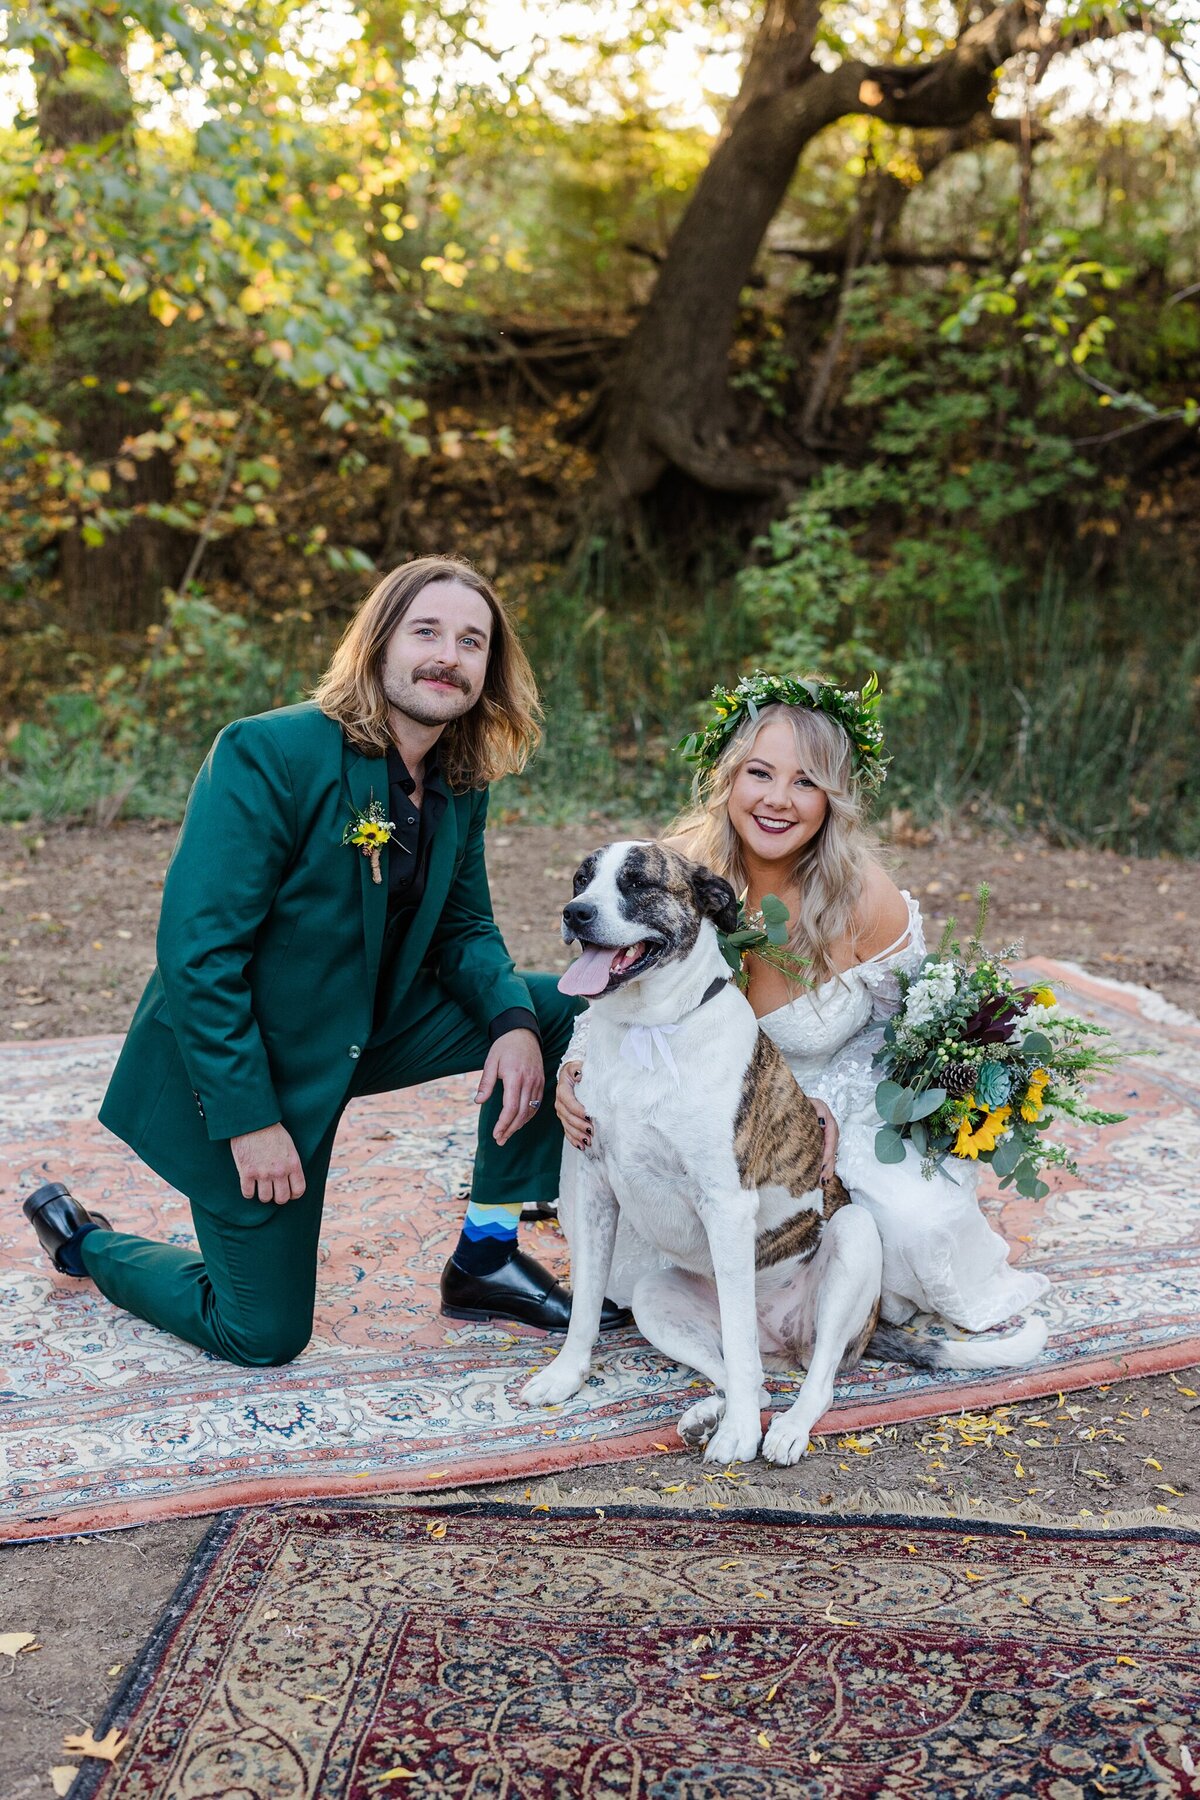 A portrait of a bride, groom, and their dog on their wedding day in Fort Worth, Texas. The bride is on the right is wearing a long sleeve, intricate, white dress with a flower crown and a large bouquet. The groom is kneeling on the left and is wearing a green suit with a black dress shirt and boutonniere. Their dog is seated in front of the bride and is mostly white with large brown patches.